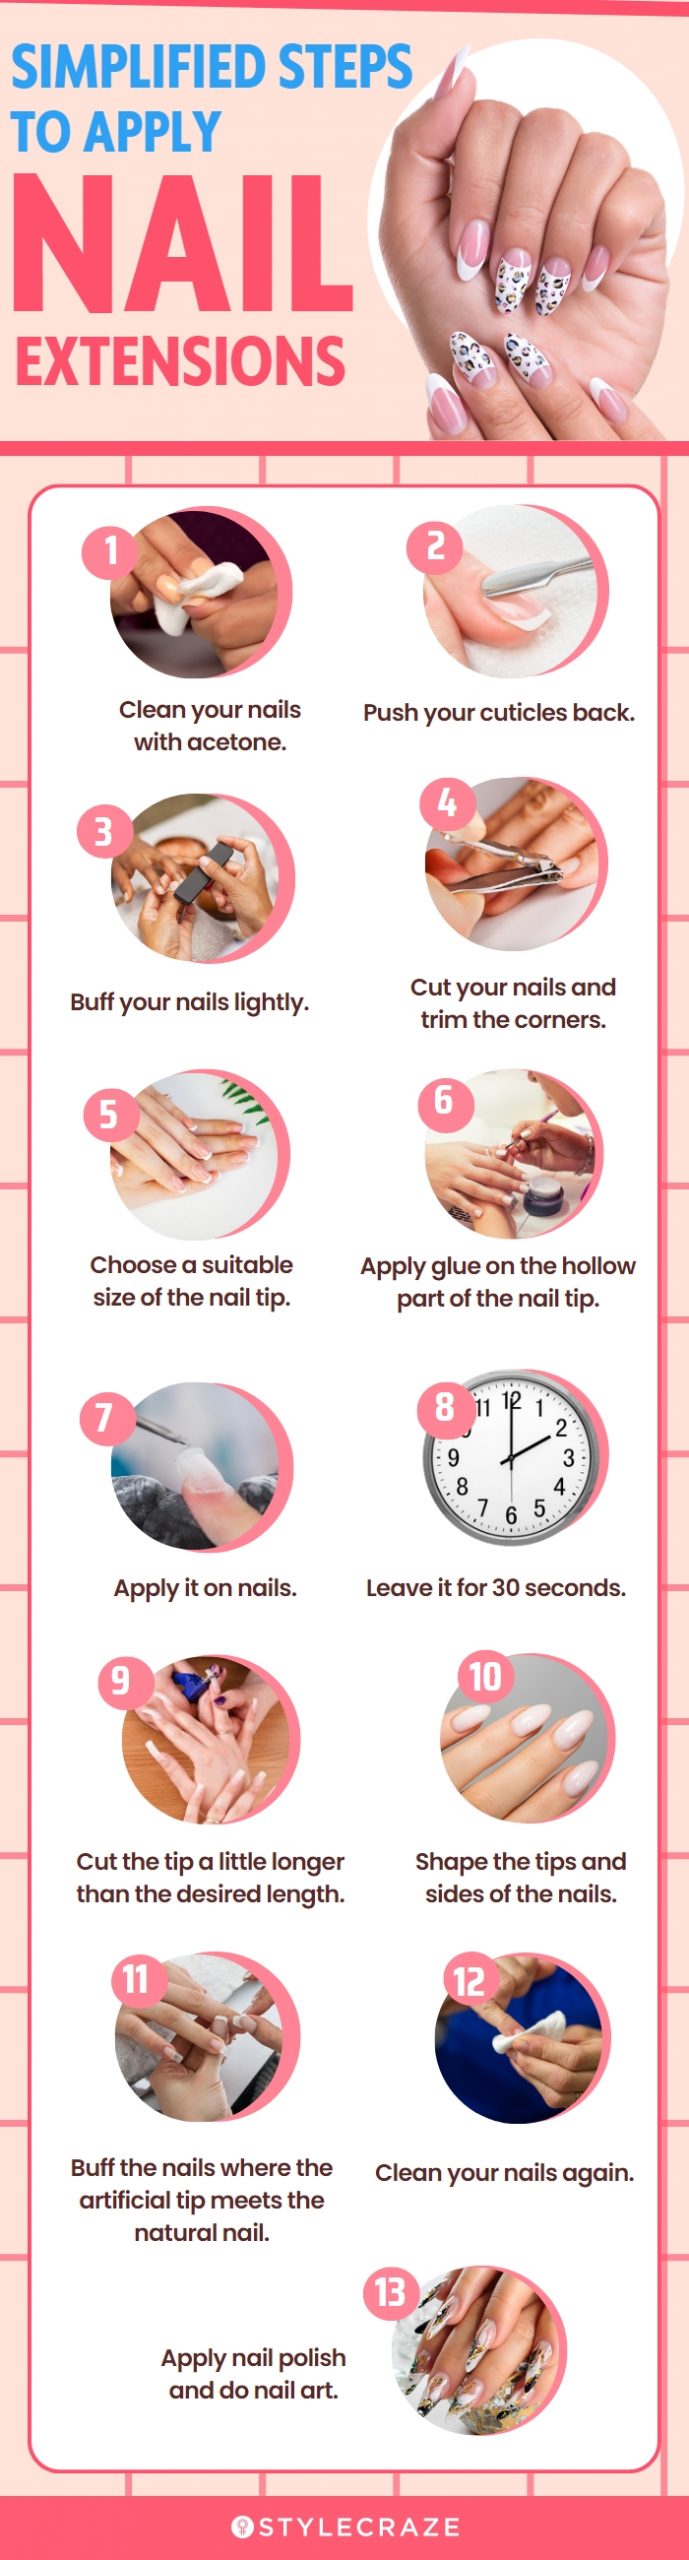 simplified steps to apply nail extension (infographic)